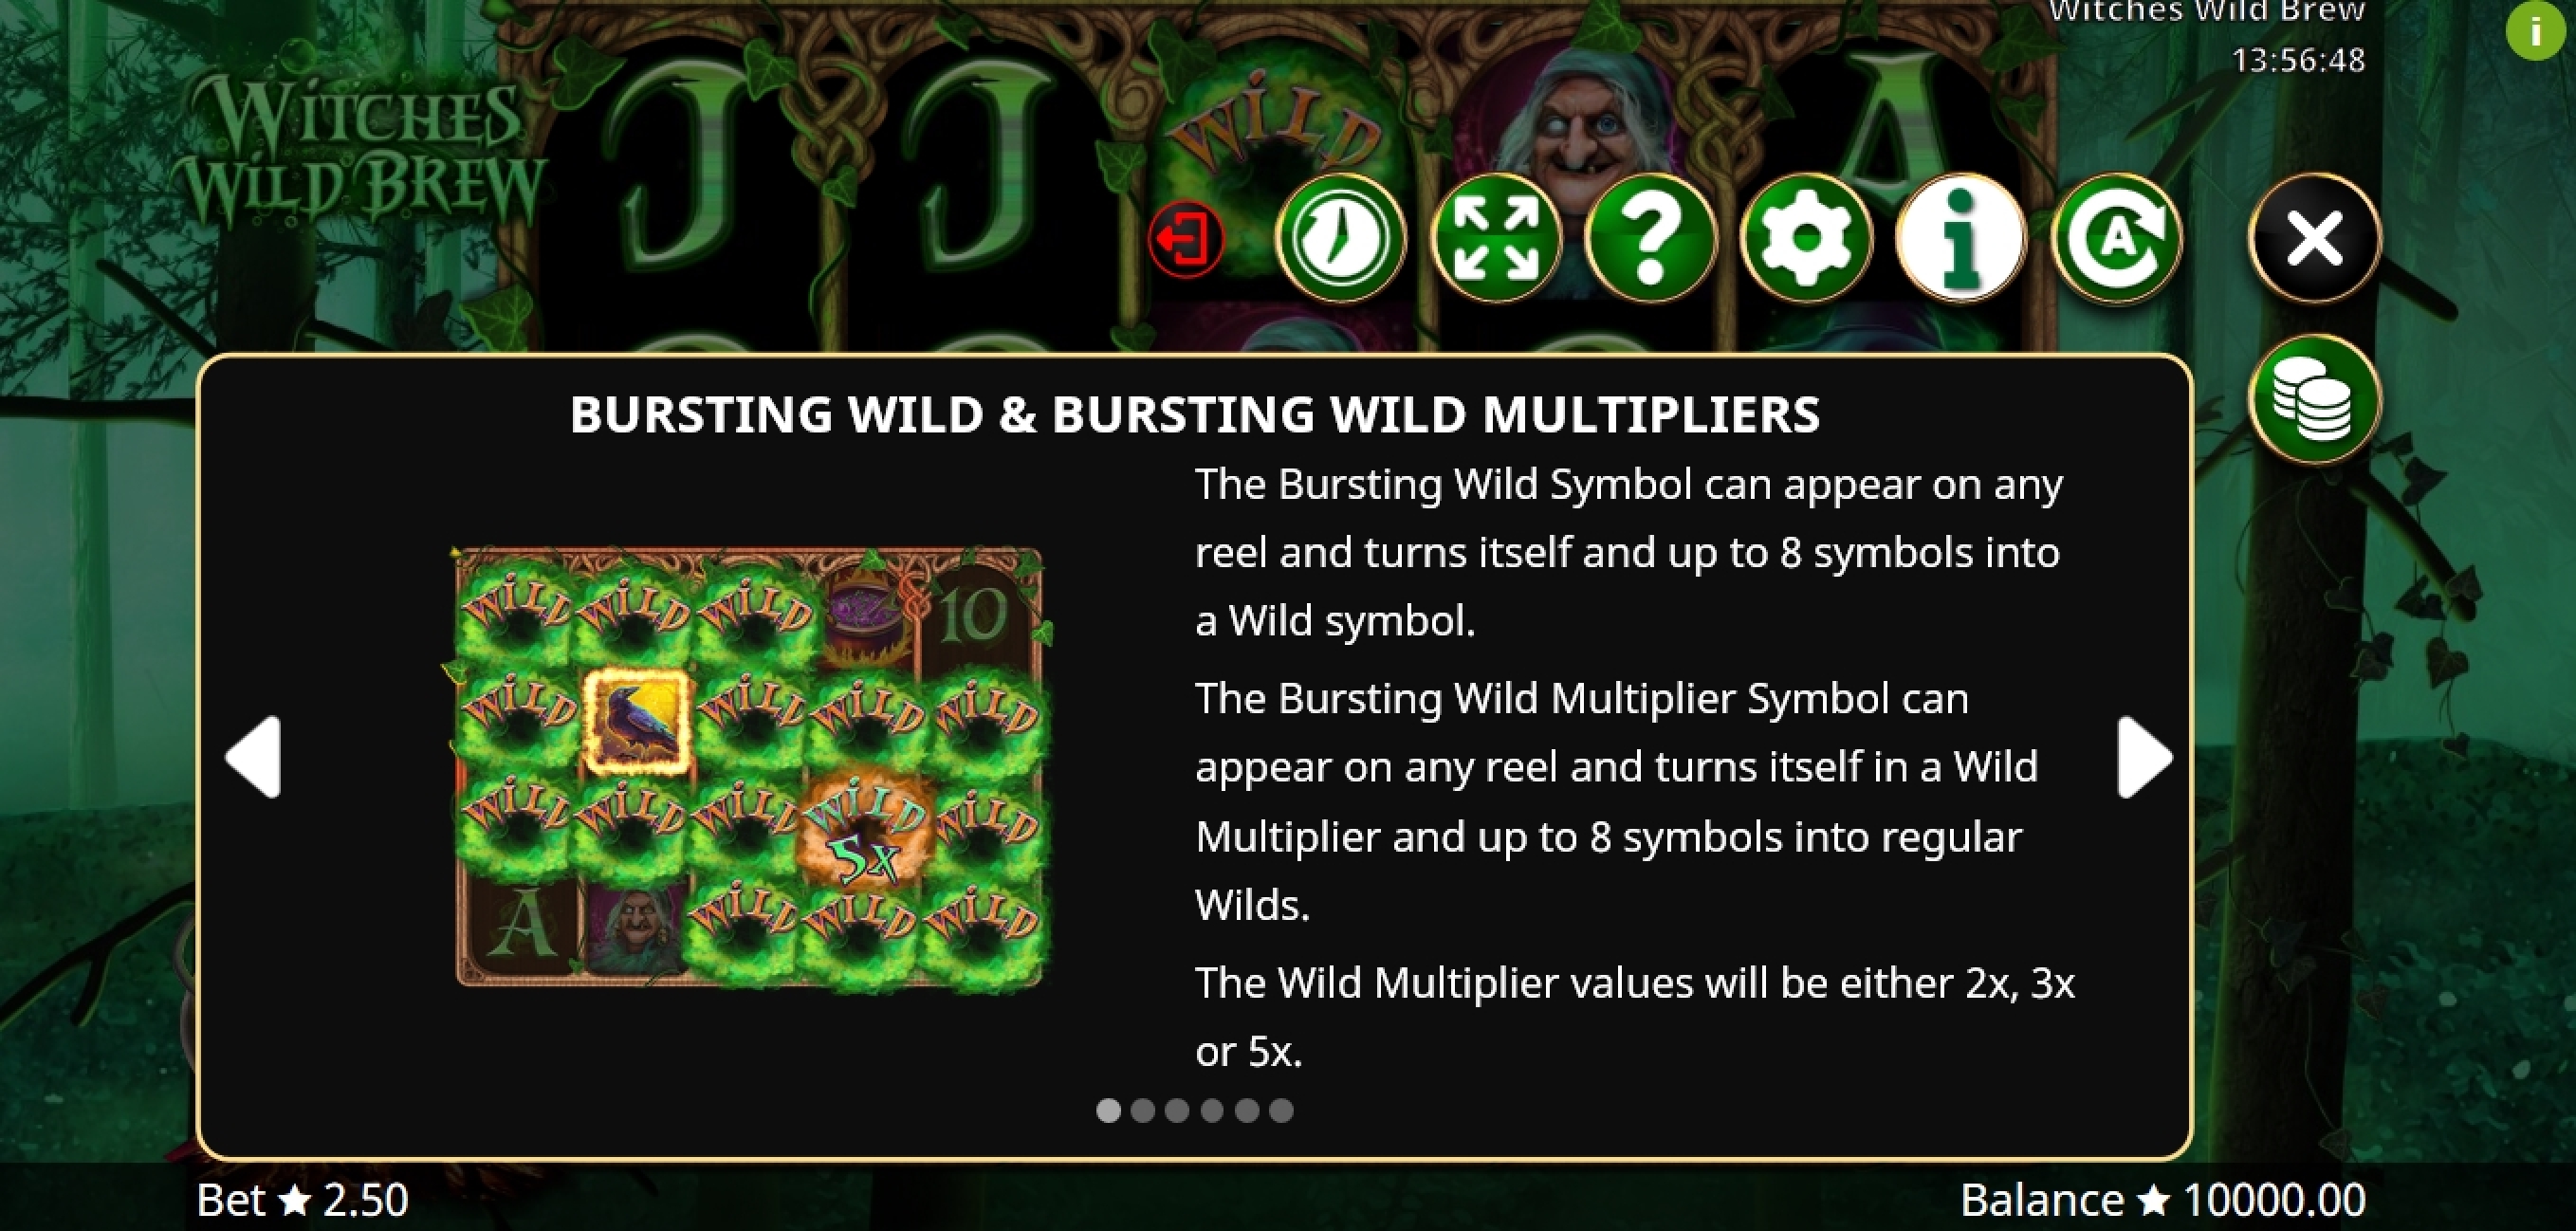 Info of Witches Wild Brew Slot Game by Booming Games